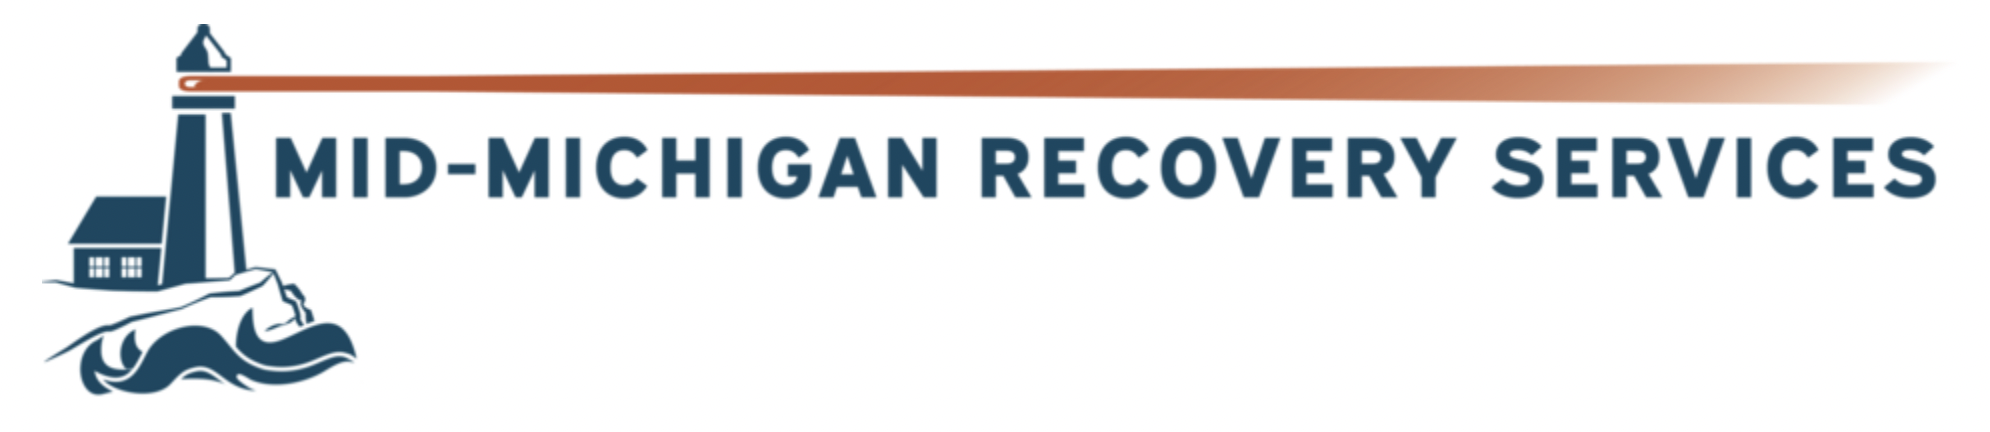 Mid - Michigan Recovery Services logo